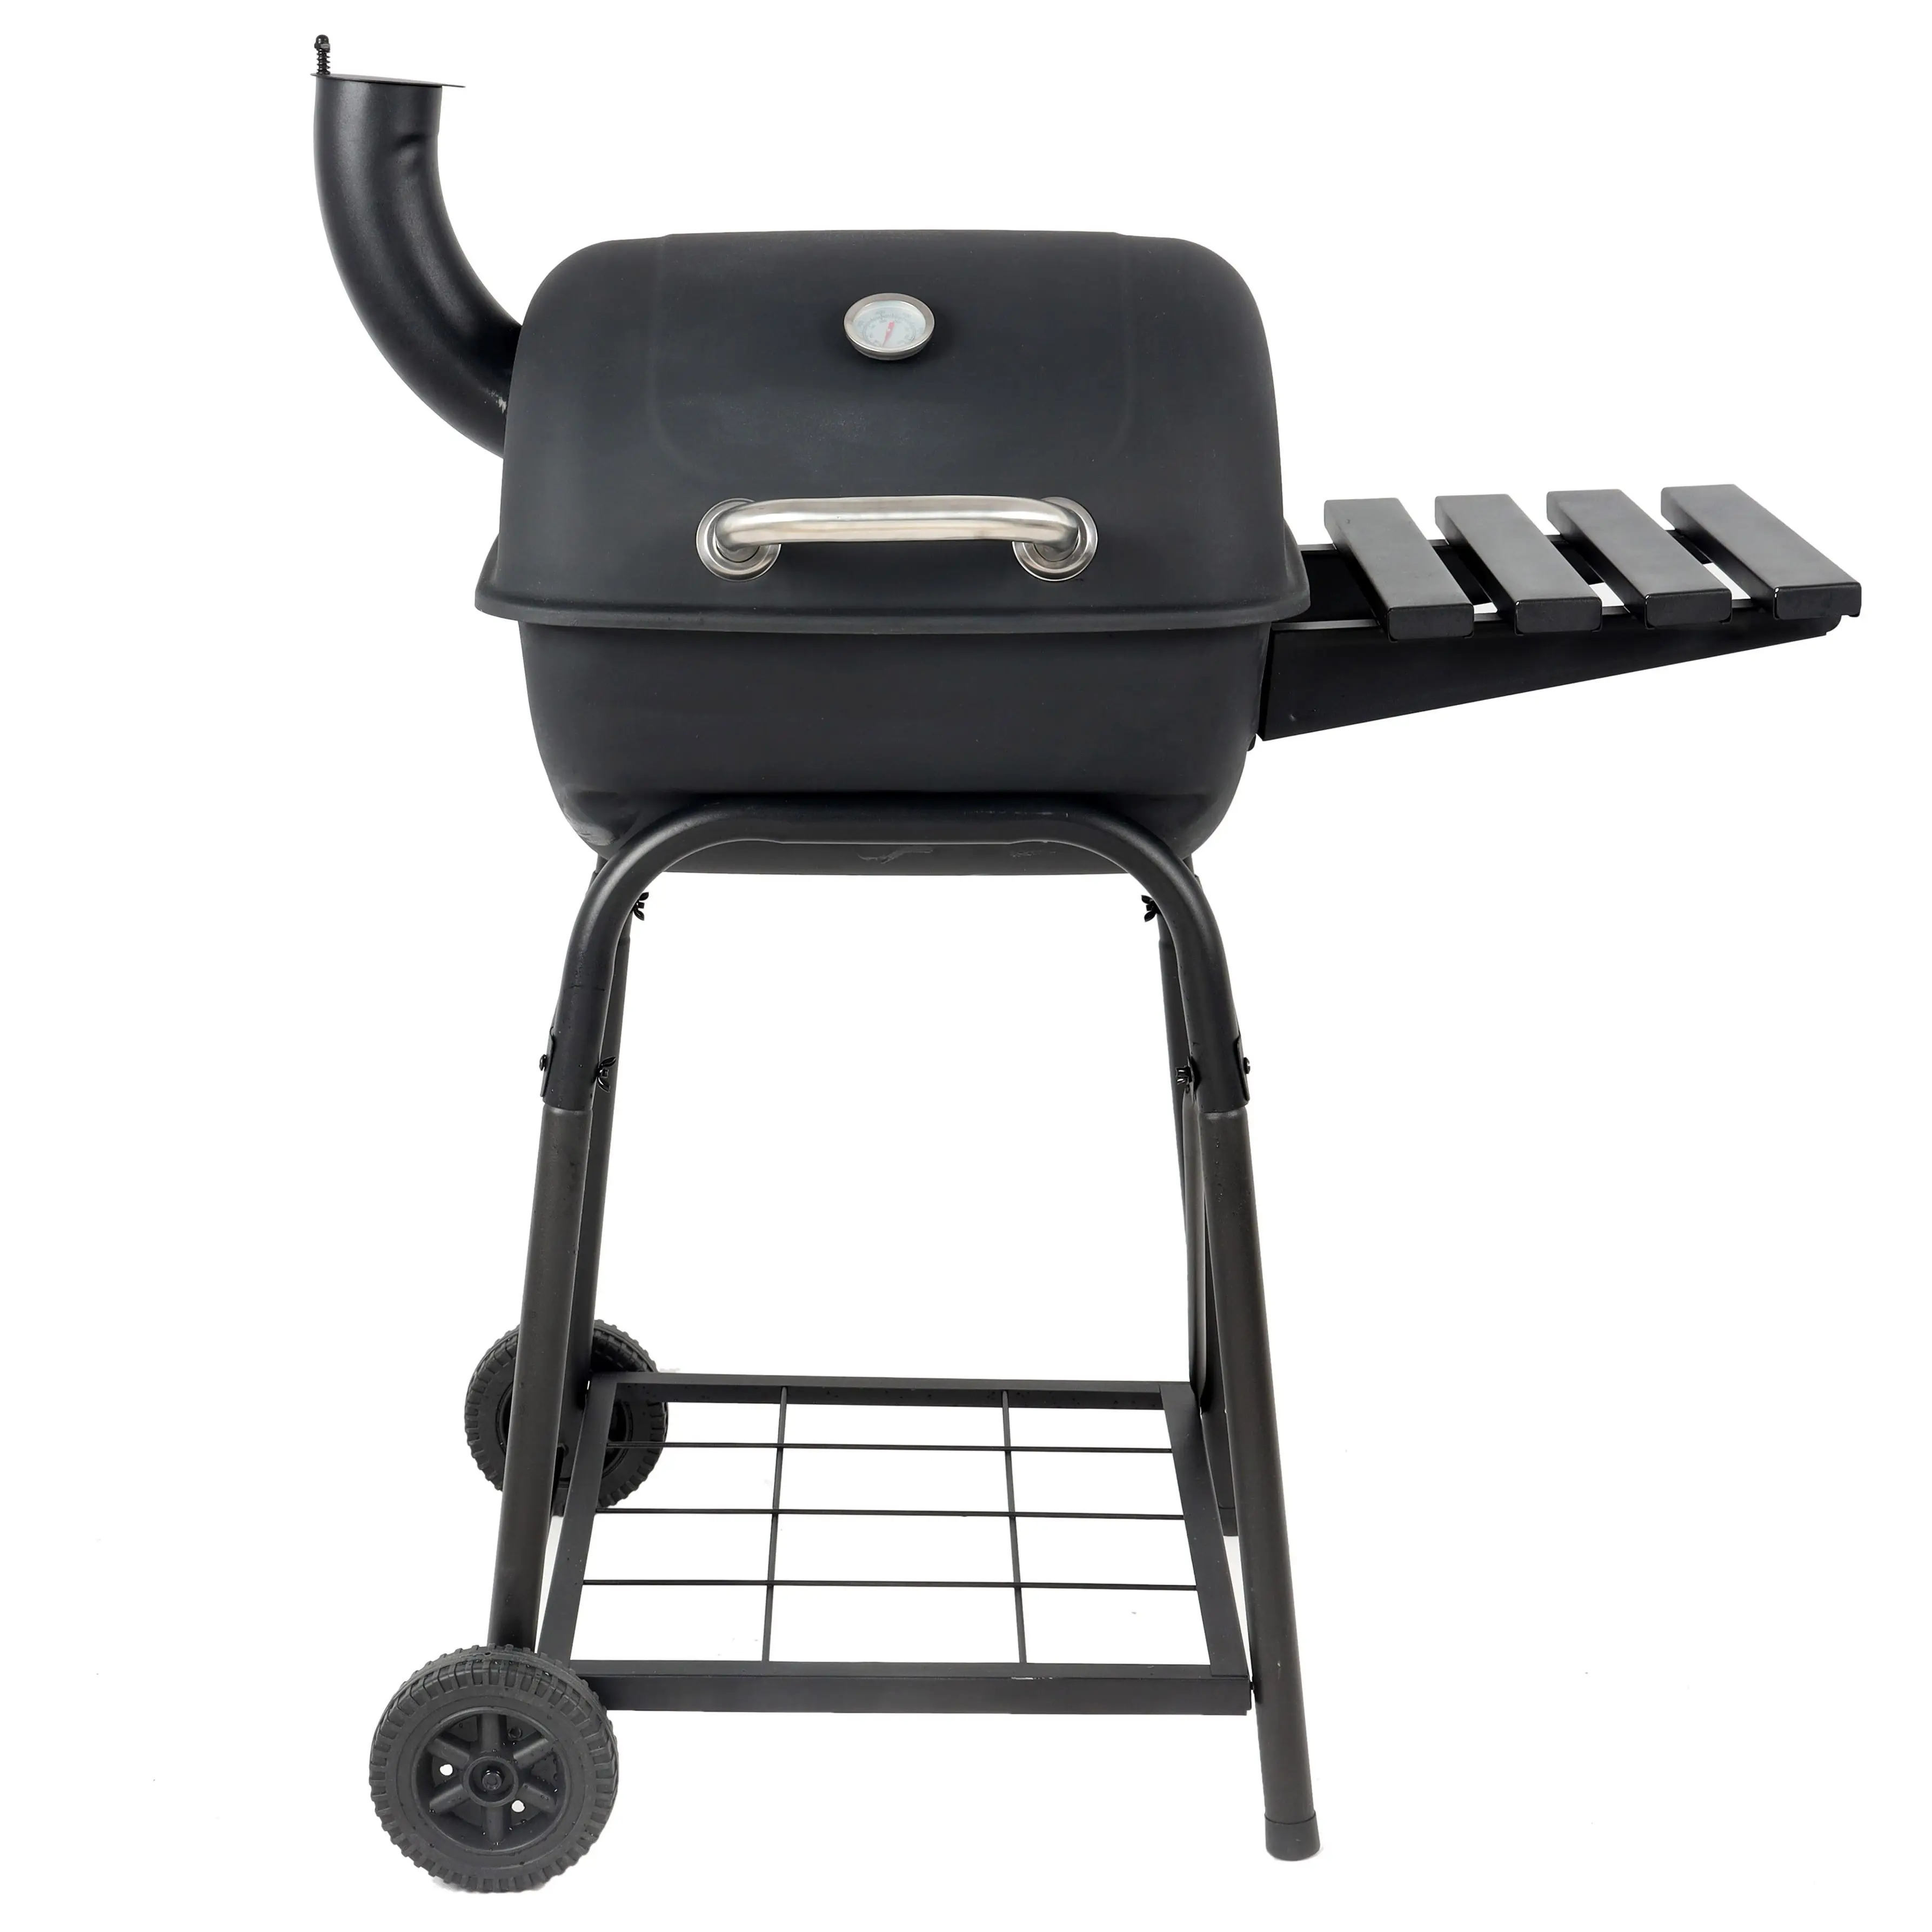 26 Iinches Mini Barrel Charcoal Grill With Side Shelf, For Camping, Barbecues, Picnics, Parties, Black (US Stock)